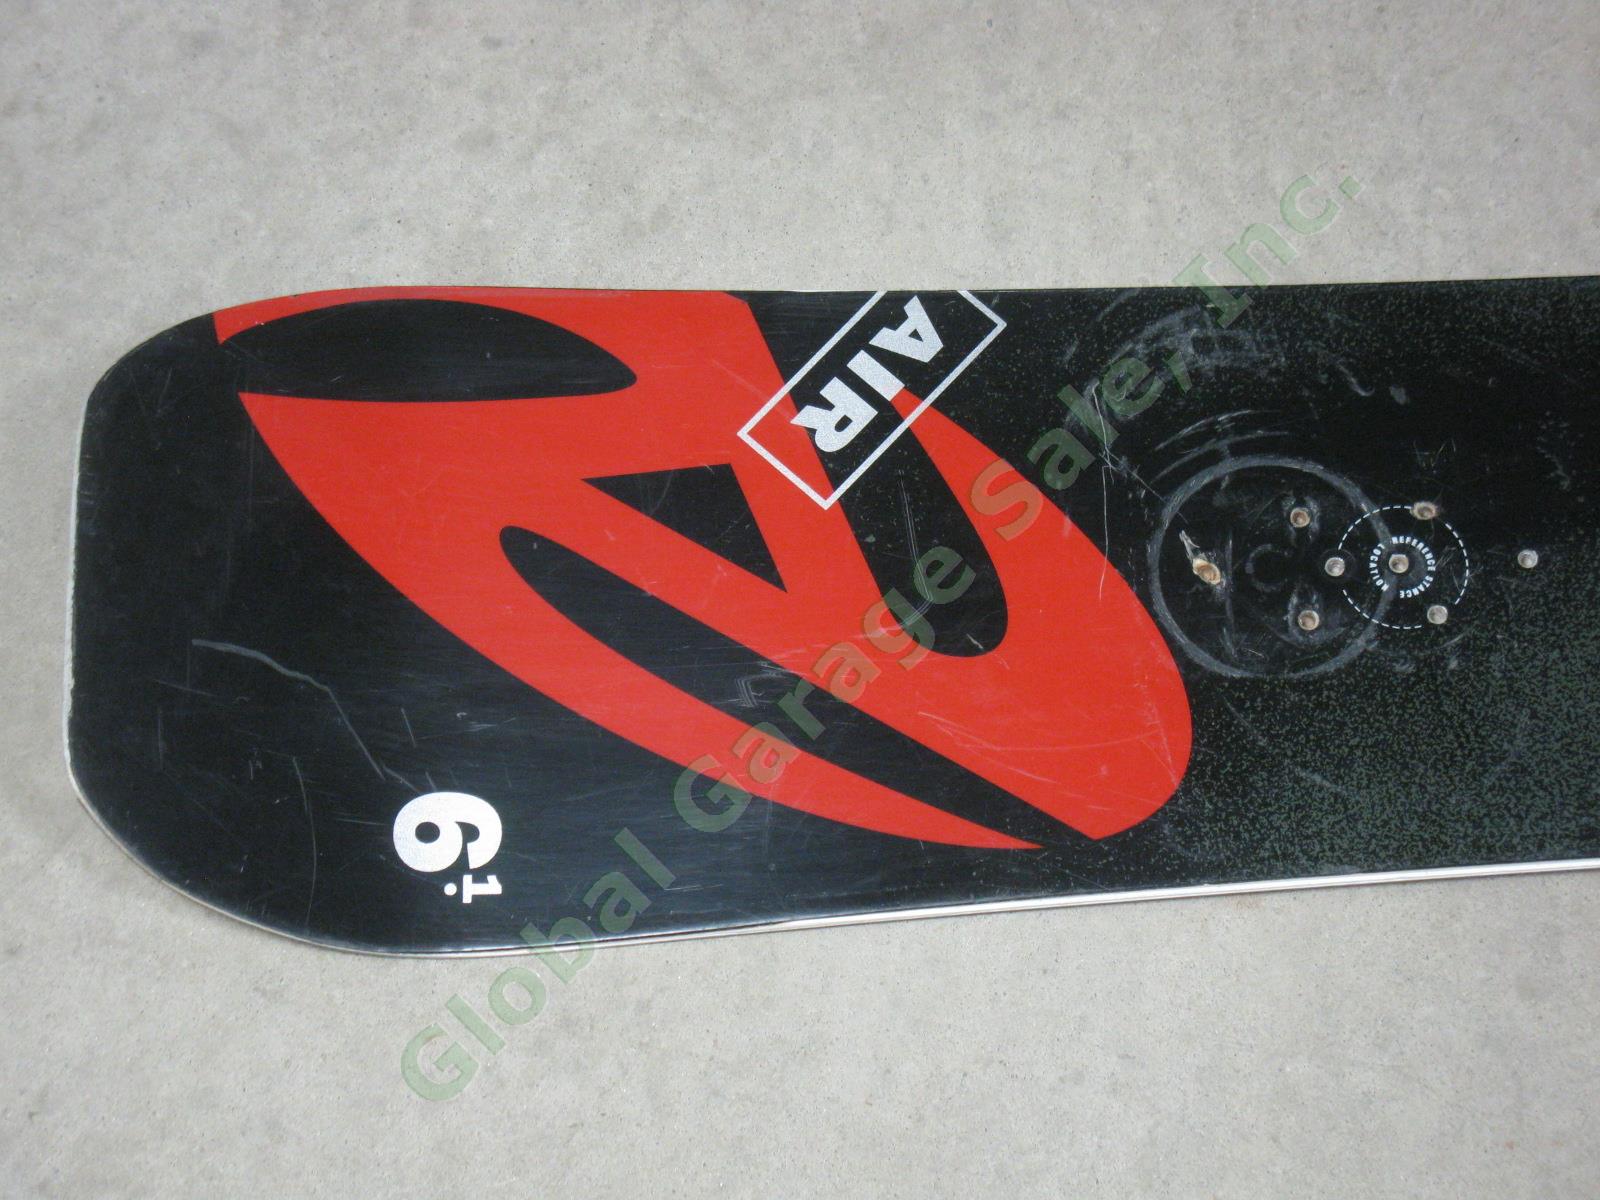 Vintage 1993 Burton Air 6.1 Snowboard Fly Graphic Wood Core USA Made 159cm NR 3